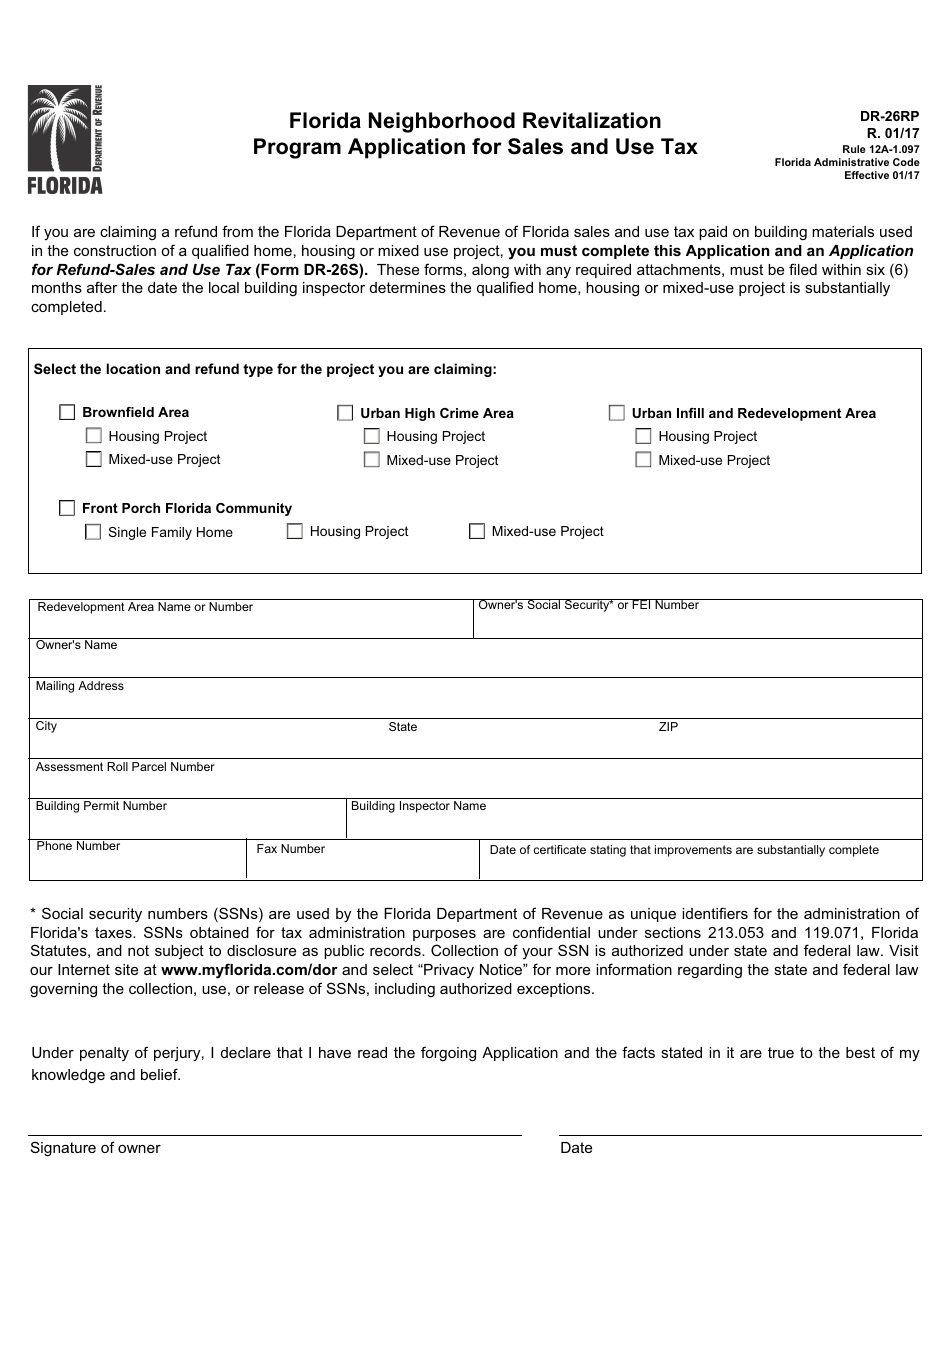 Form DR-26RP Florida Neighborhood Revitalization Program Application for Sales and Use Tax - Florida, Page 1